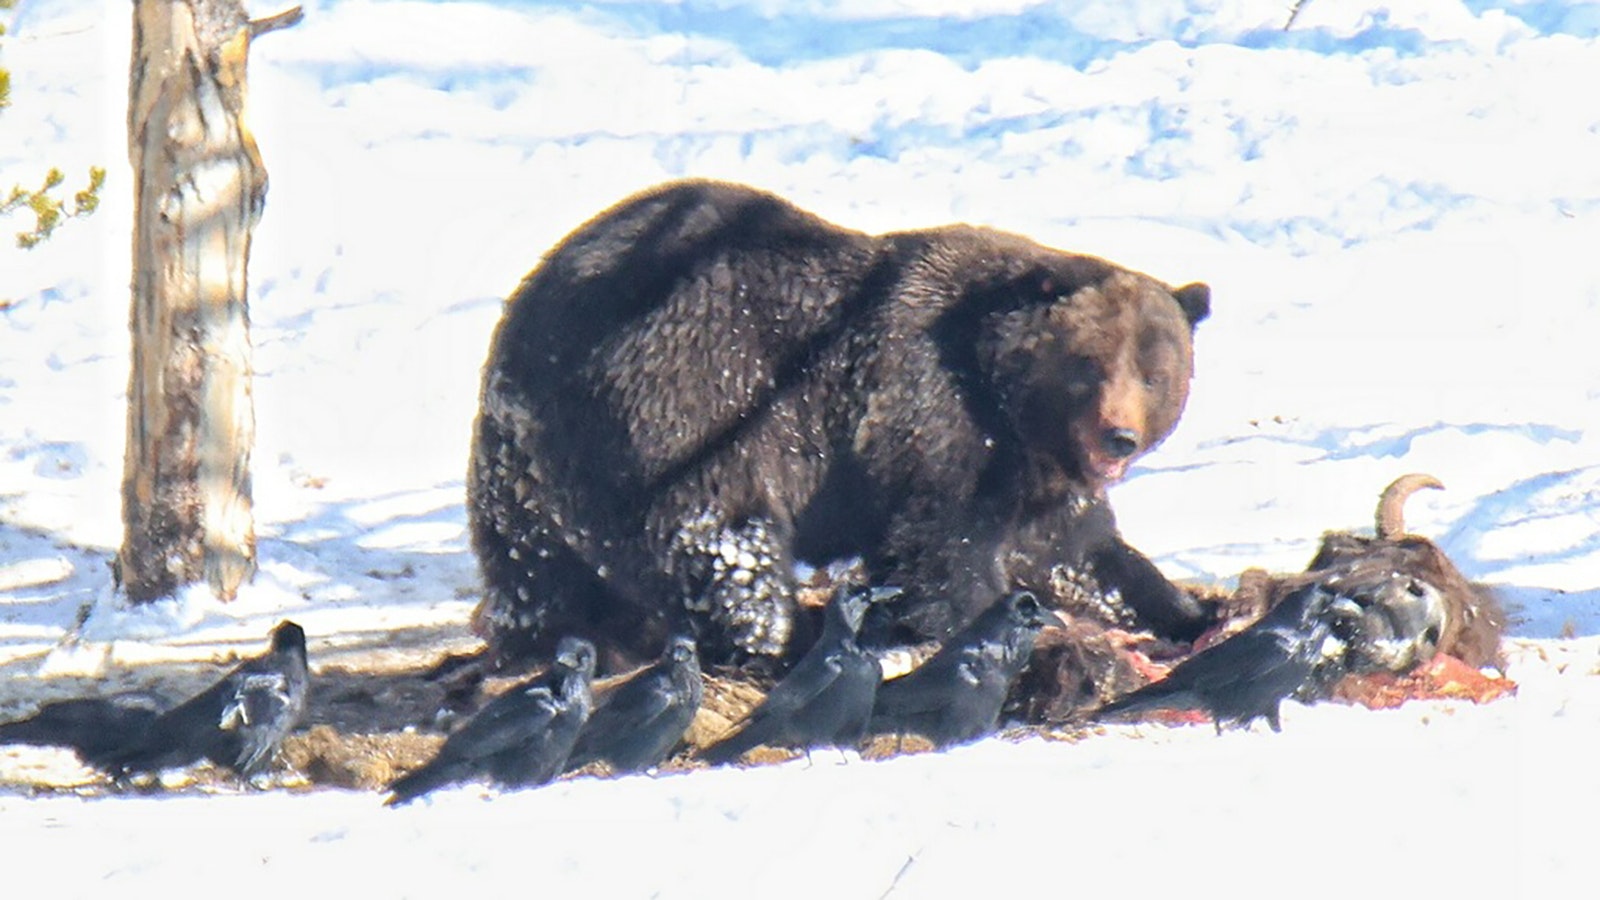 This huge male grizzly was the first bear of the season to emerge from the den in Yellowstone National Park. It, another large male, made short work of a bison carcass.